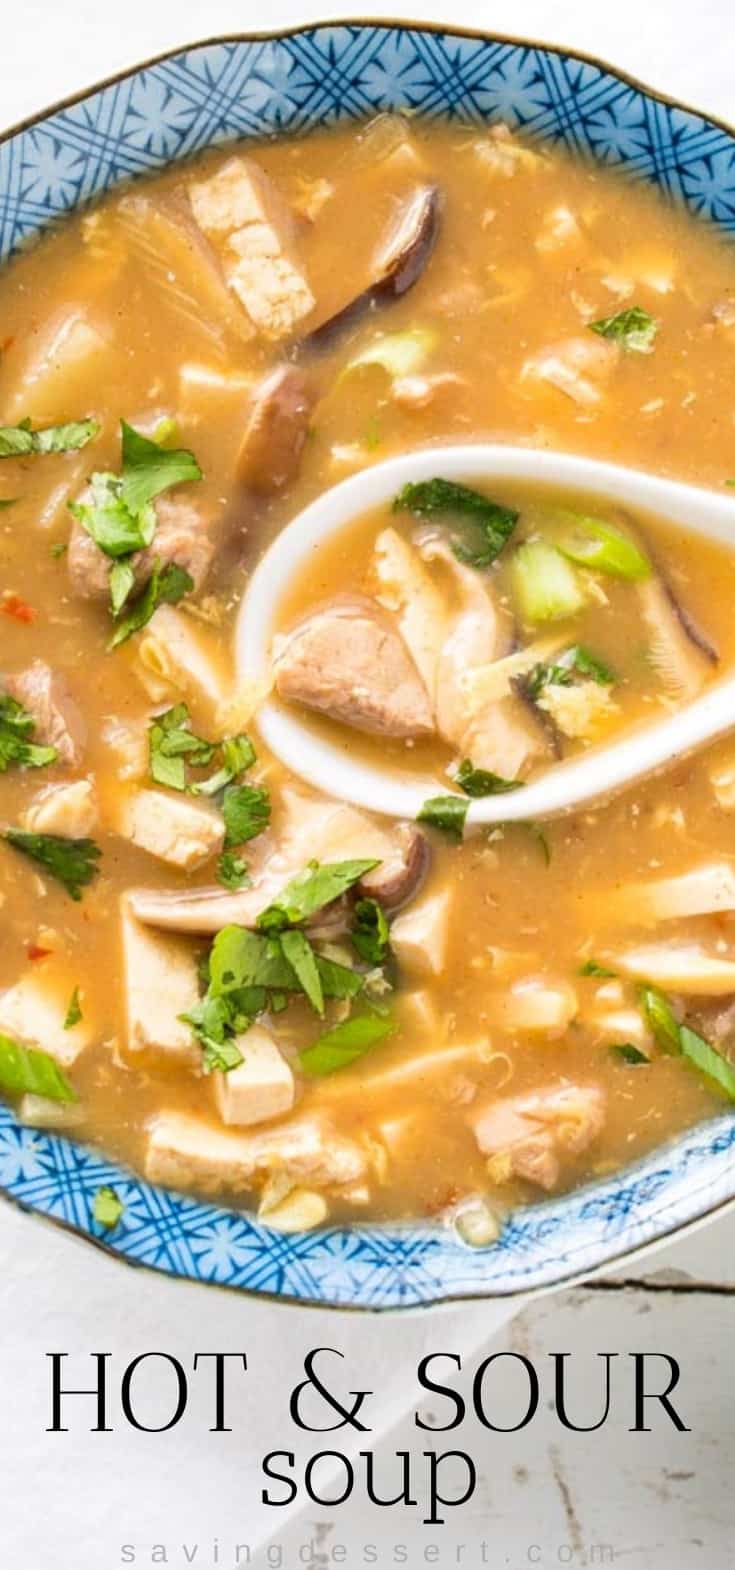 A bowl of homemade hot and sour soup garnished with cilantro